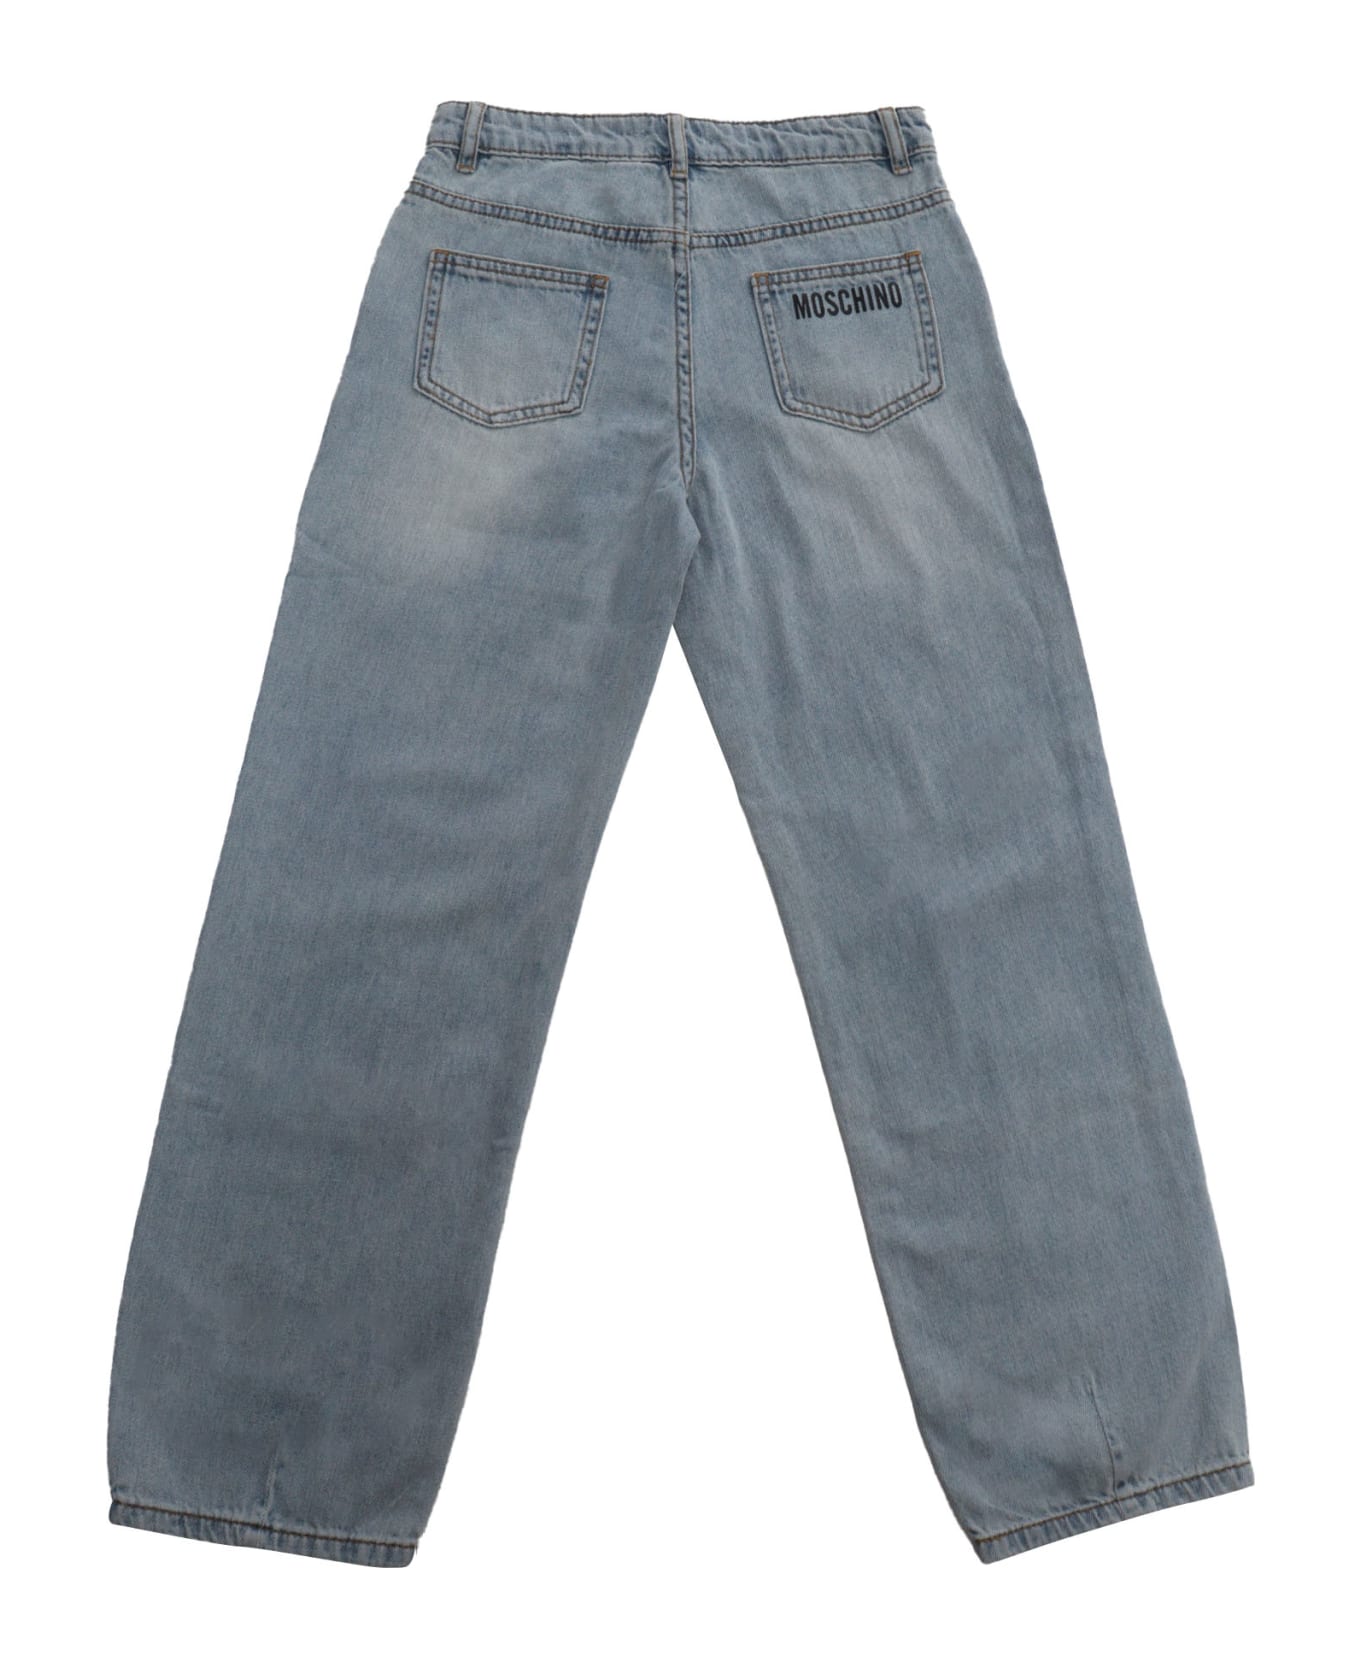 Moschino Baggy Jeans - LIGHT BLUE